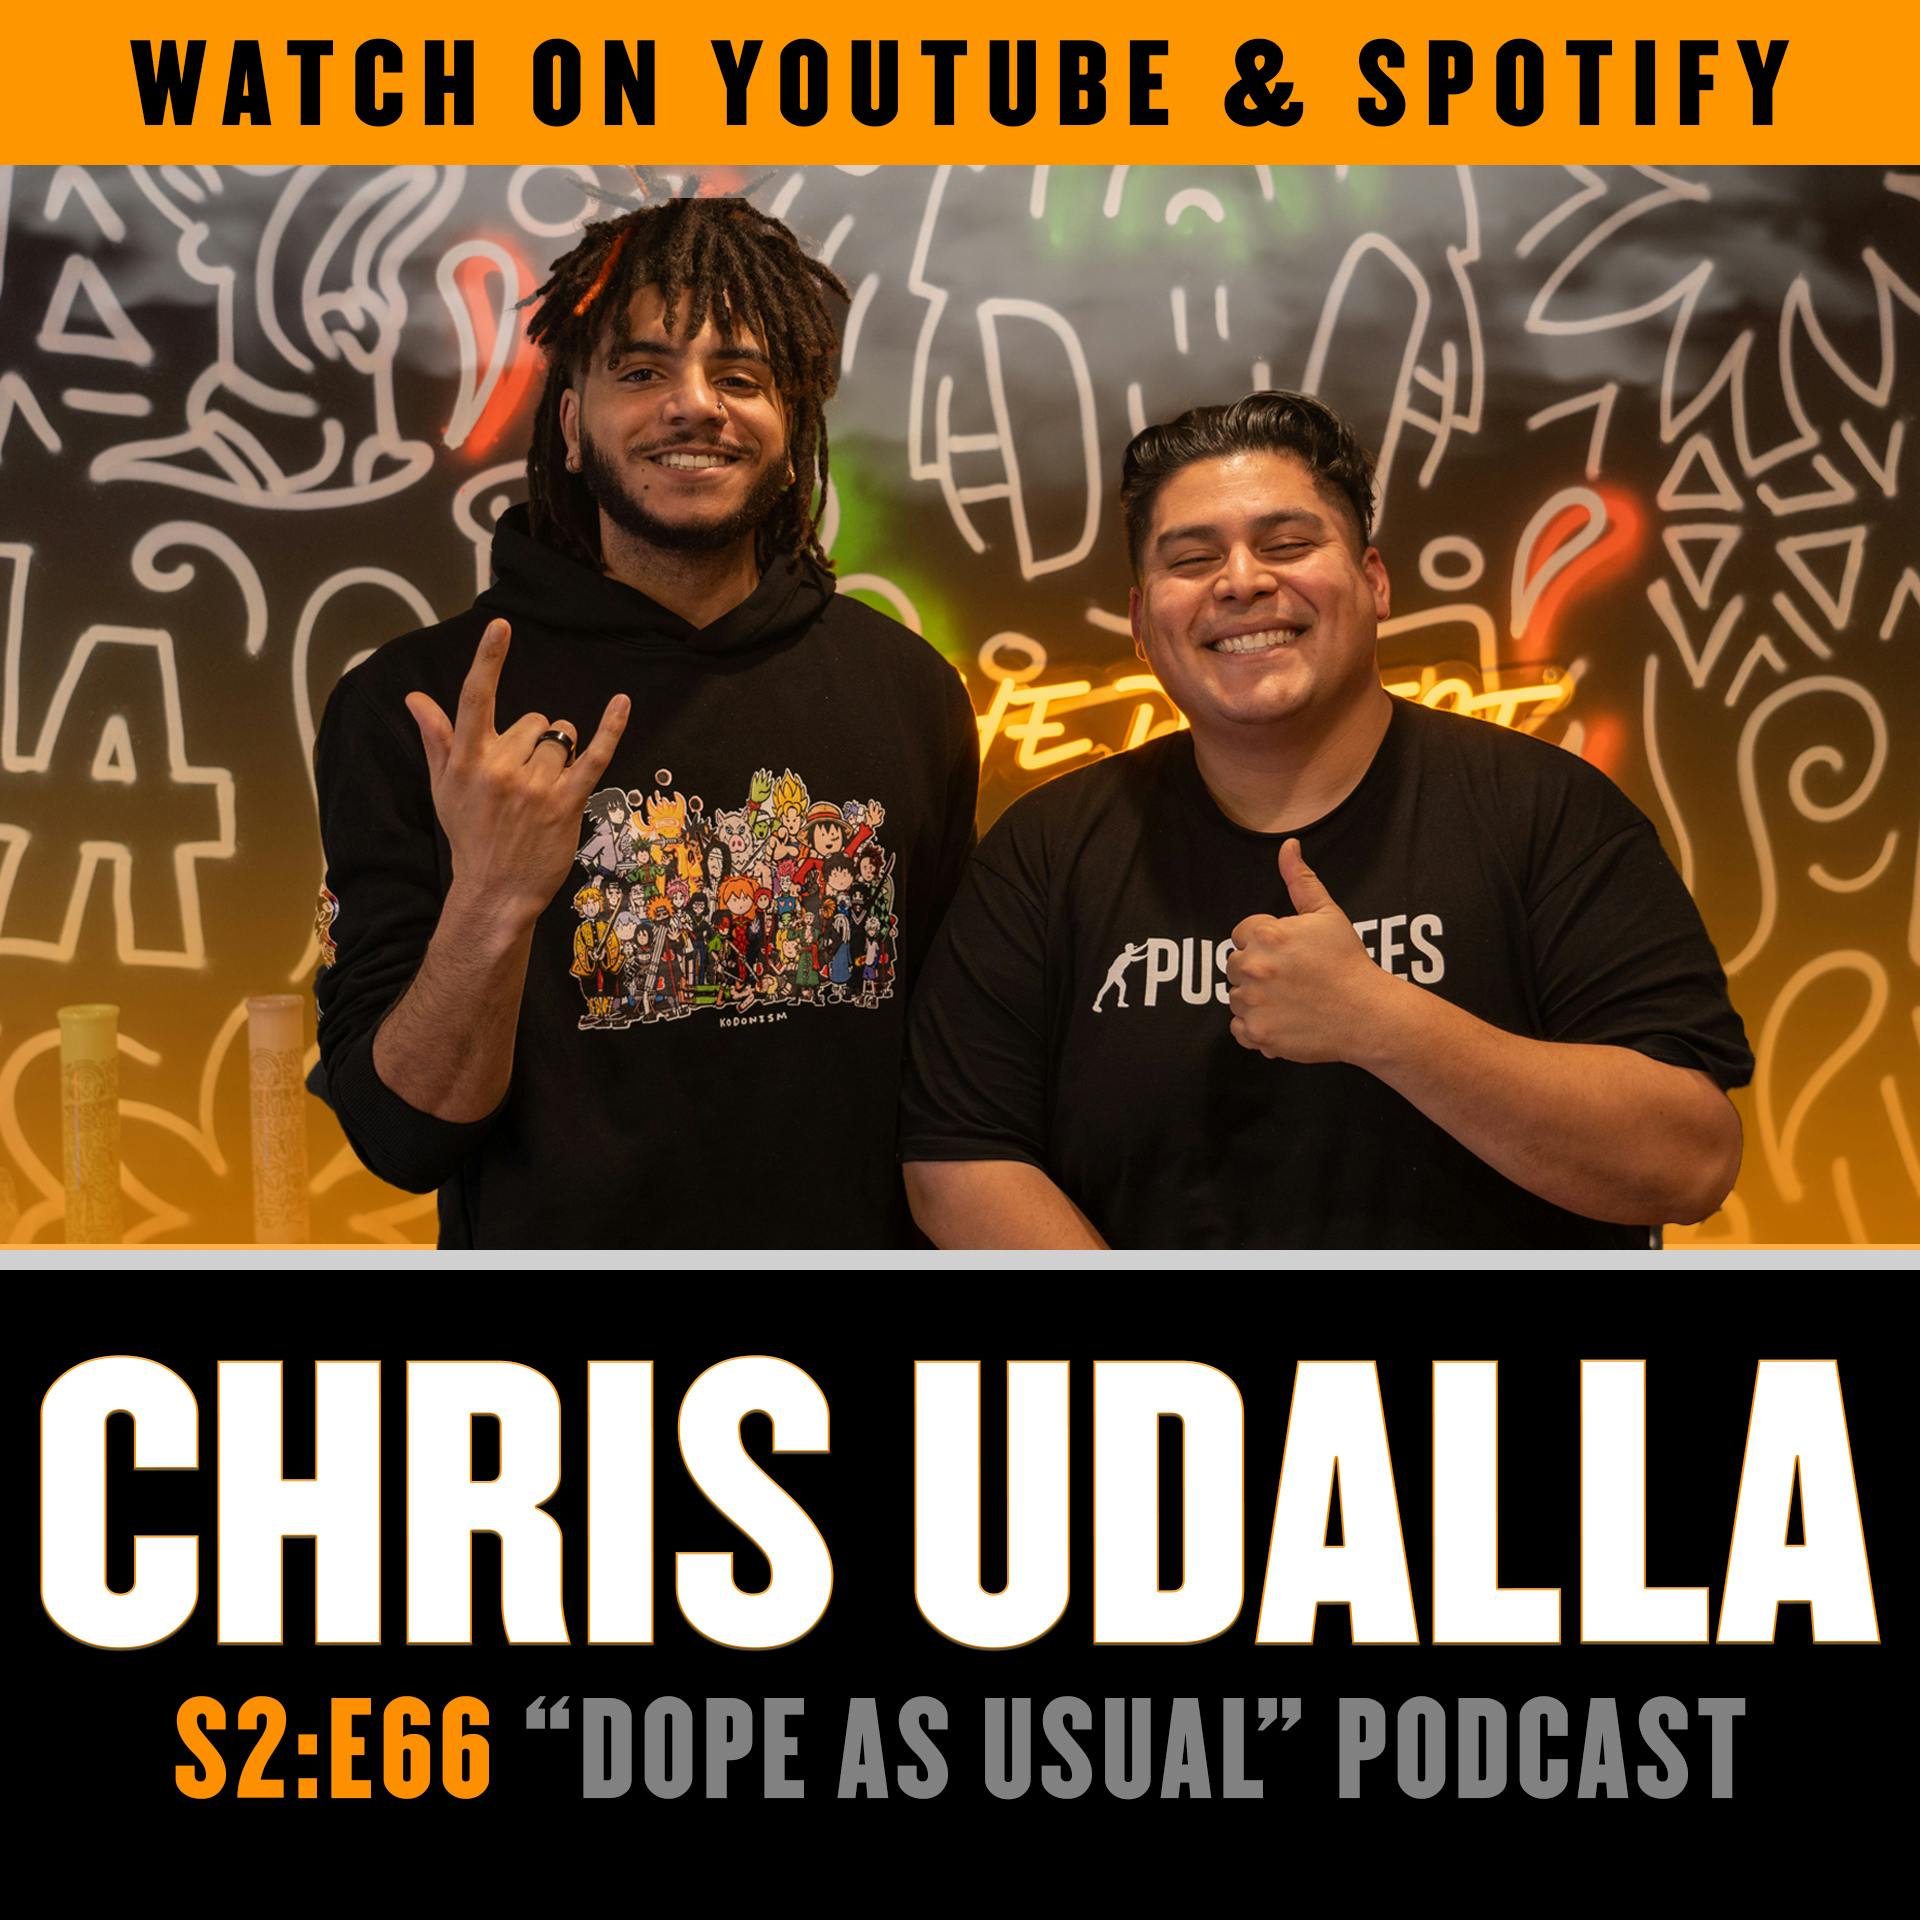 Chris Udalla's First Interview | Hosted by Dope as Yola